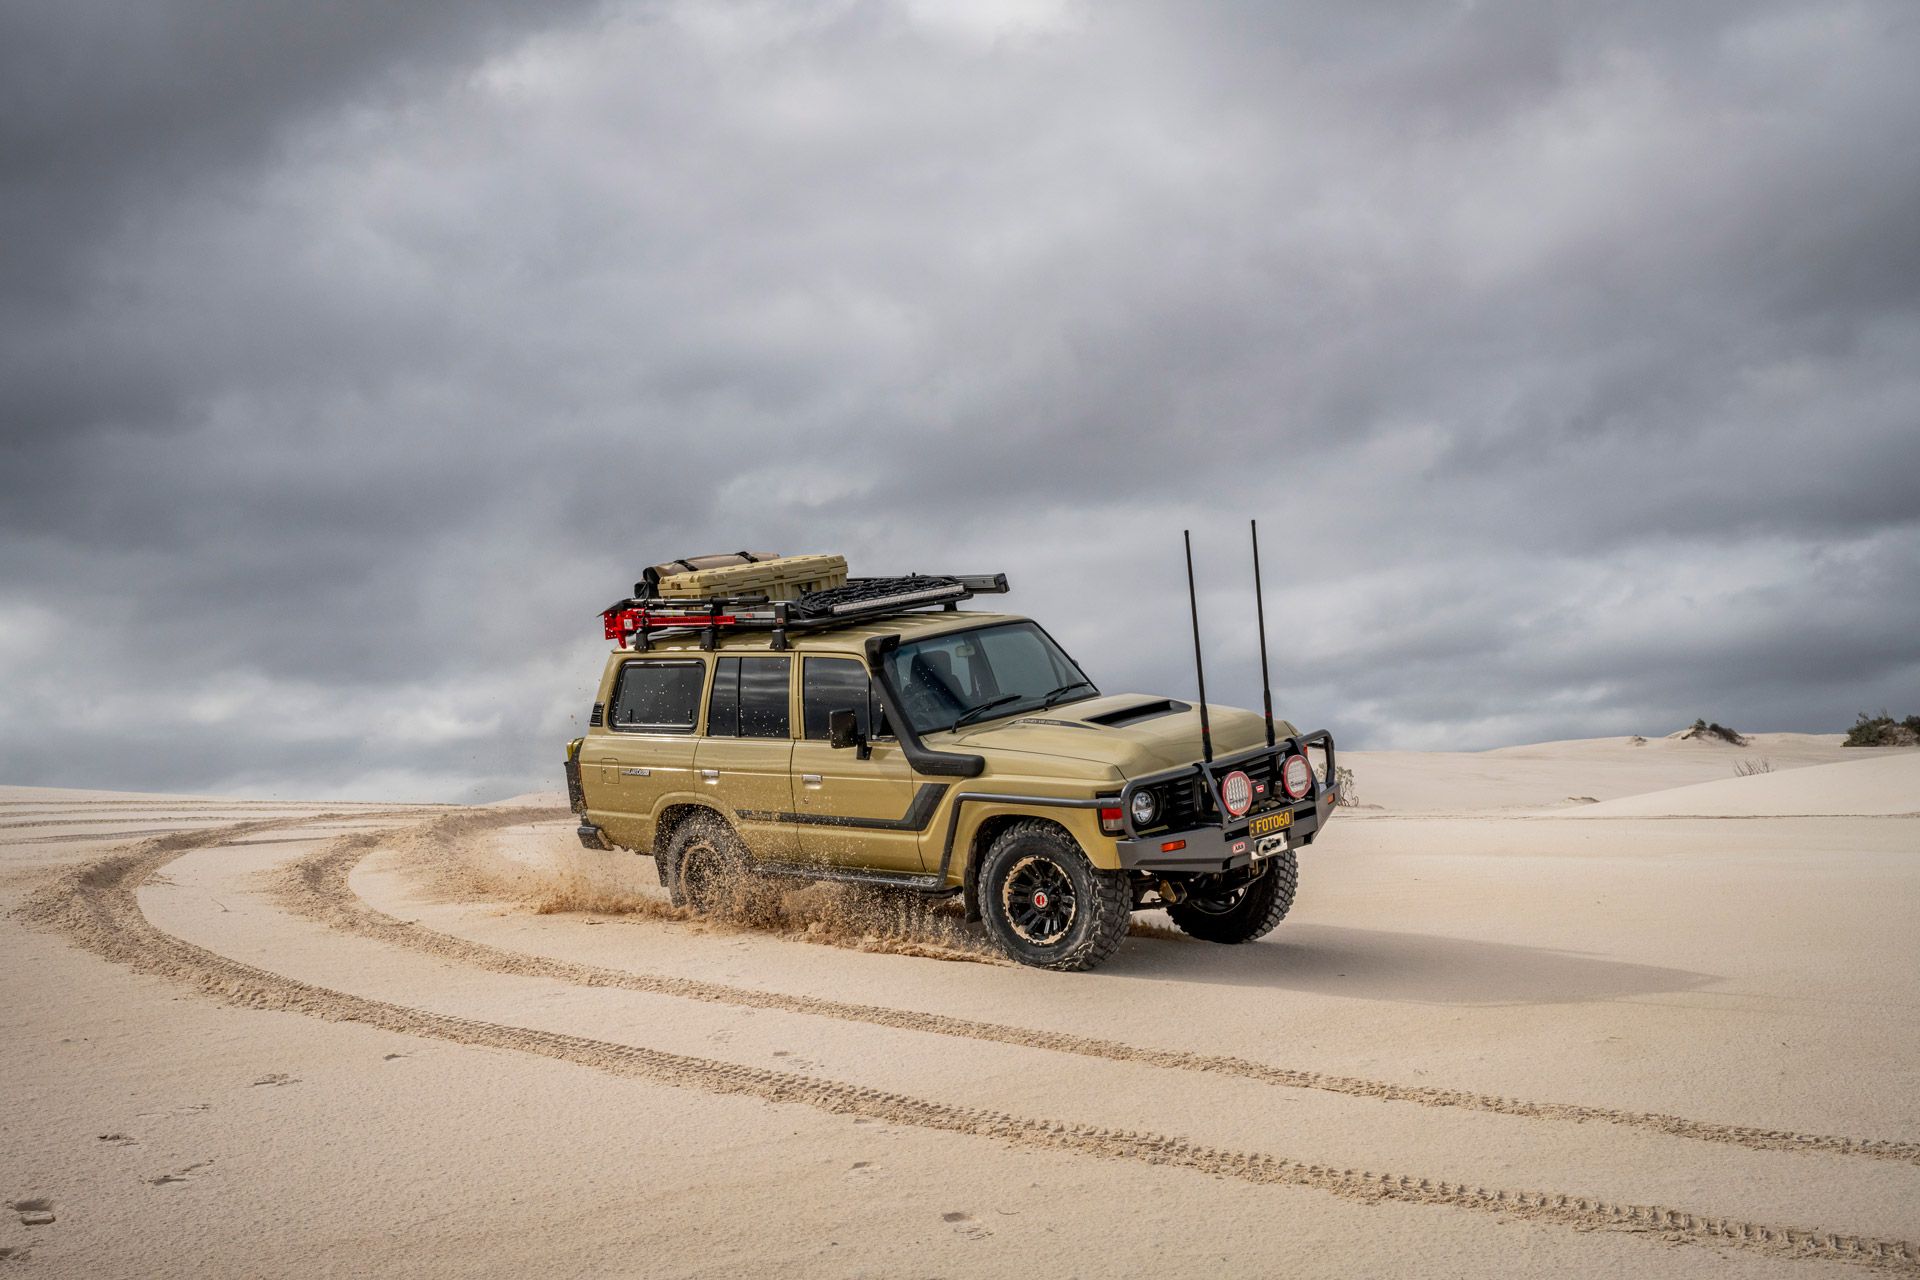 ROH Vapour wheels on Sandy 60 Series LandCruiser carving up the beach